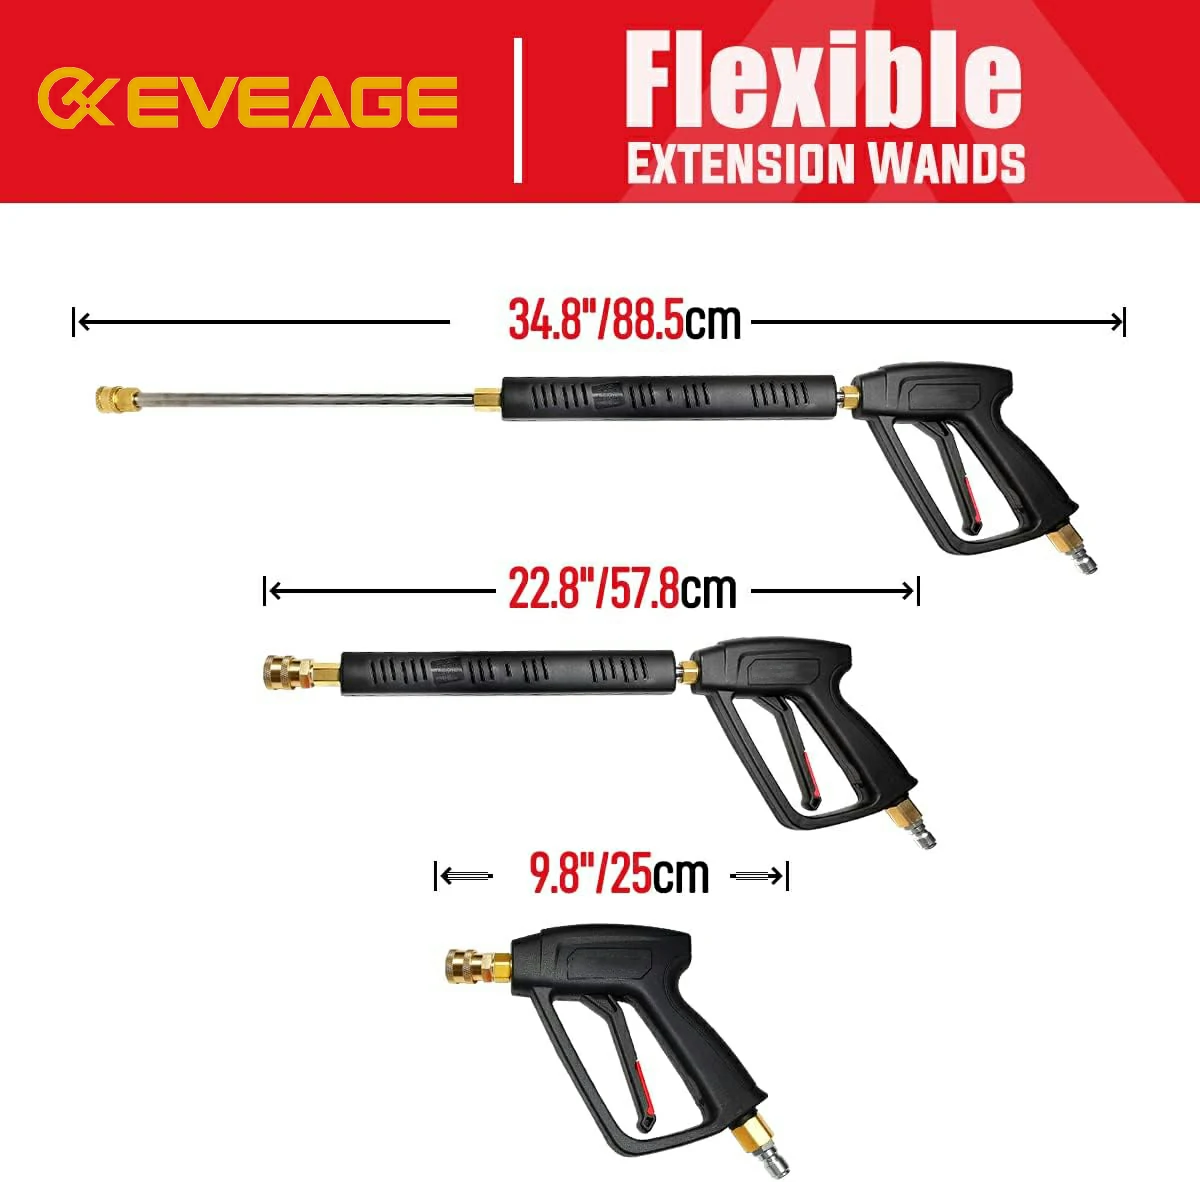 EVEAGE Brass Pressure Washer Gun and Hose Kit, 25 FT Power Washer Hose and Extension Wand